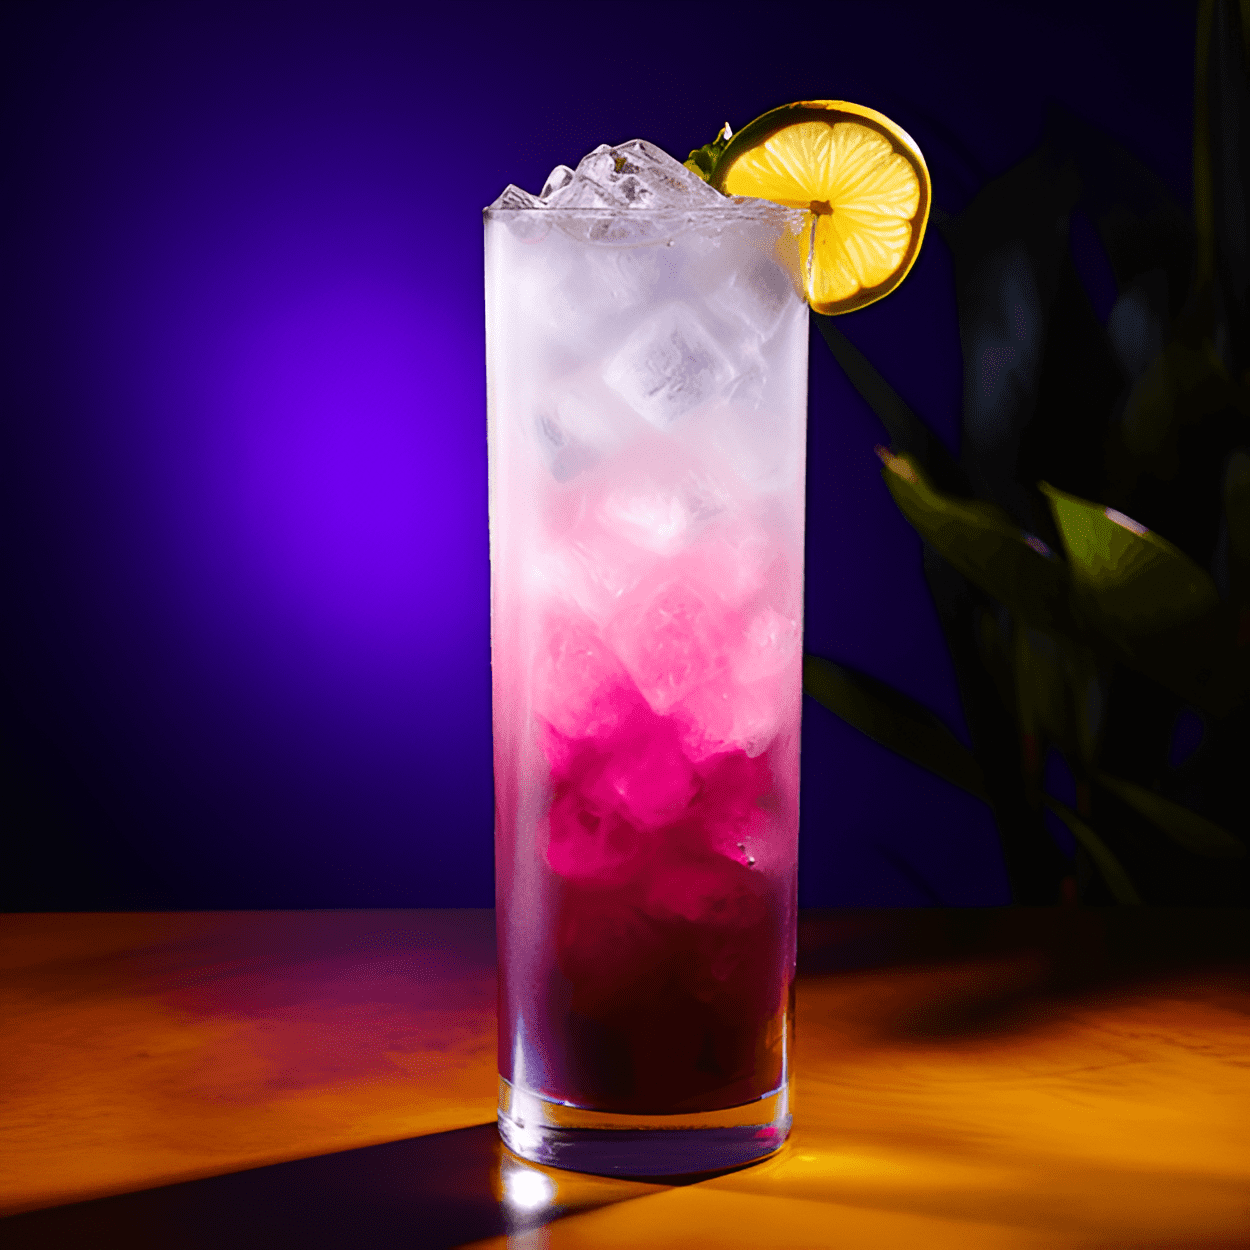 Grape Ape Cocktail Recipe - The Grape Ape cocktail is a sweet and fruity drink with a vibrant purple color. It has a refreshing and tangy taste, with a hint of sourness from the lemon-lime soda. The combination of grape vodka, blue curaçao, and cranberry juice creates a unique and delightful flavor.